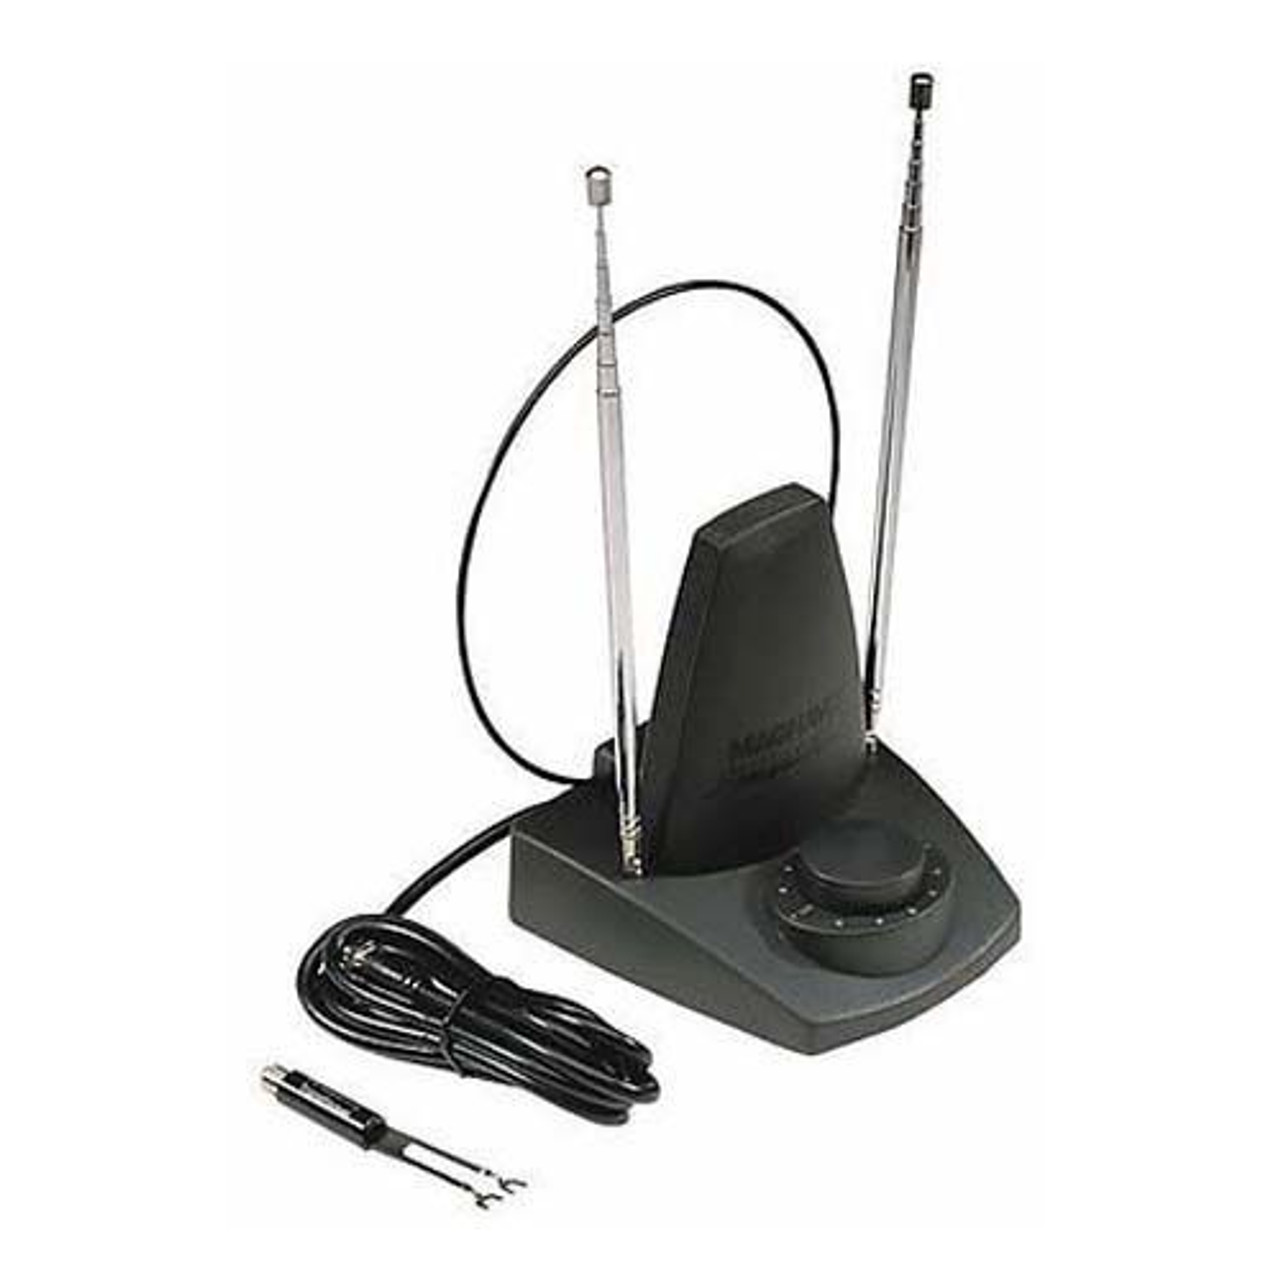 RCA ANT121 HD TV Antenna Indoor with Fine Tuning Channel Signal Aerial with Smart Tuner Local Channel Signal Aerial with Smart Tuner